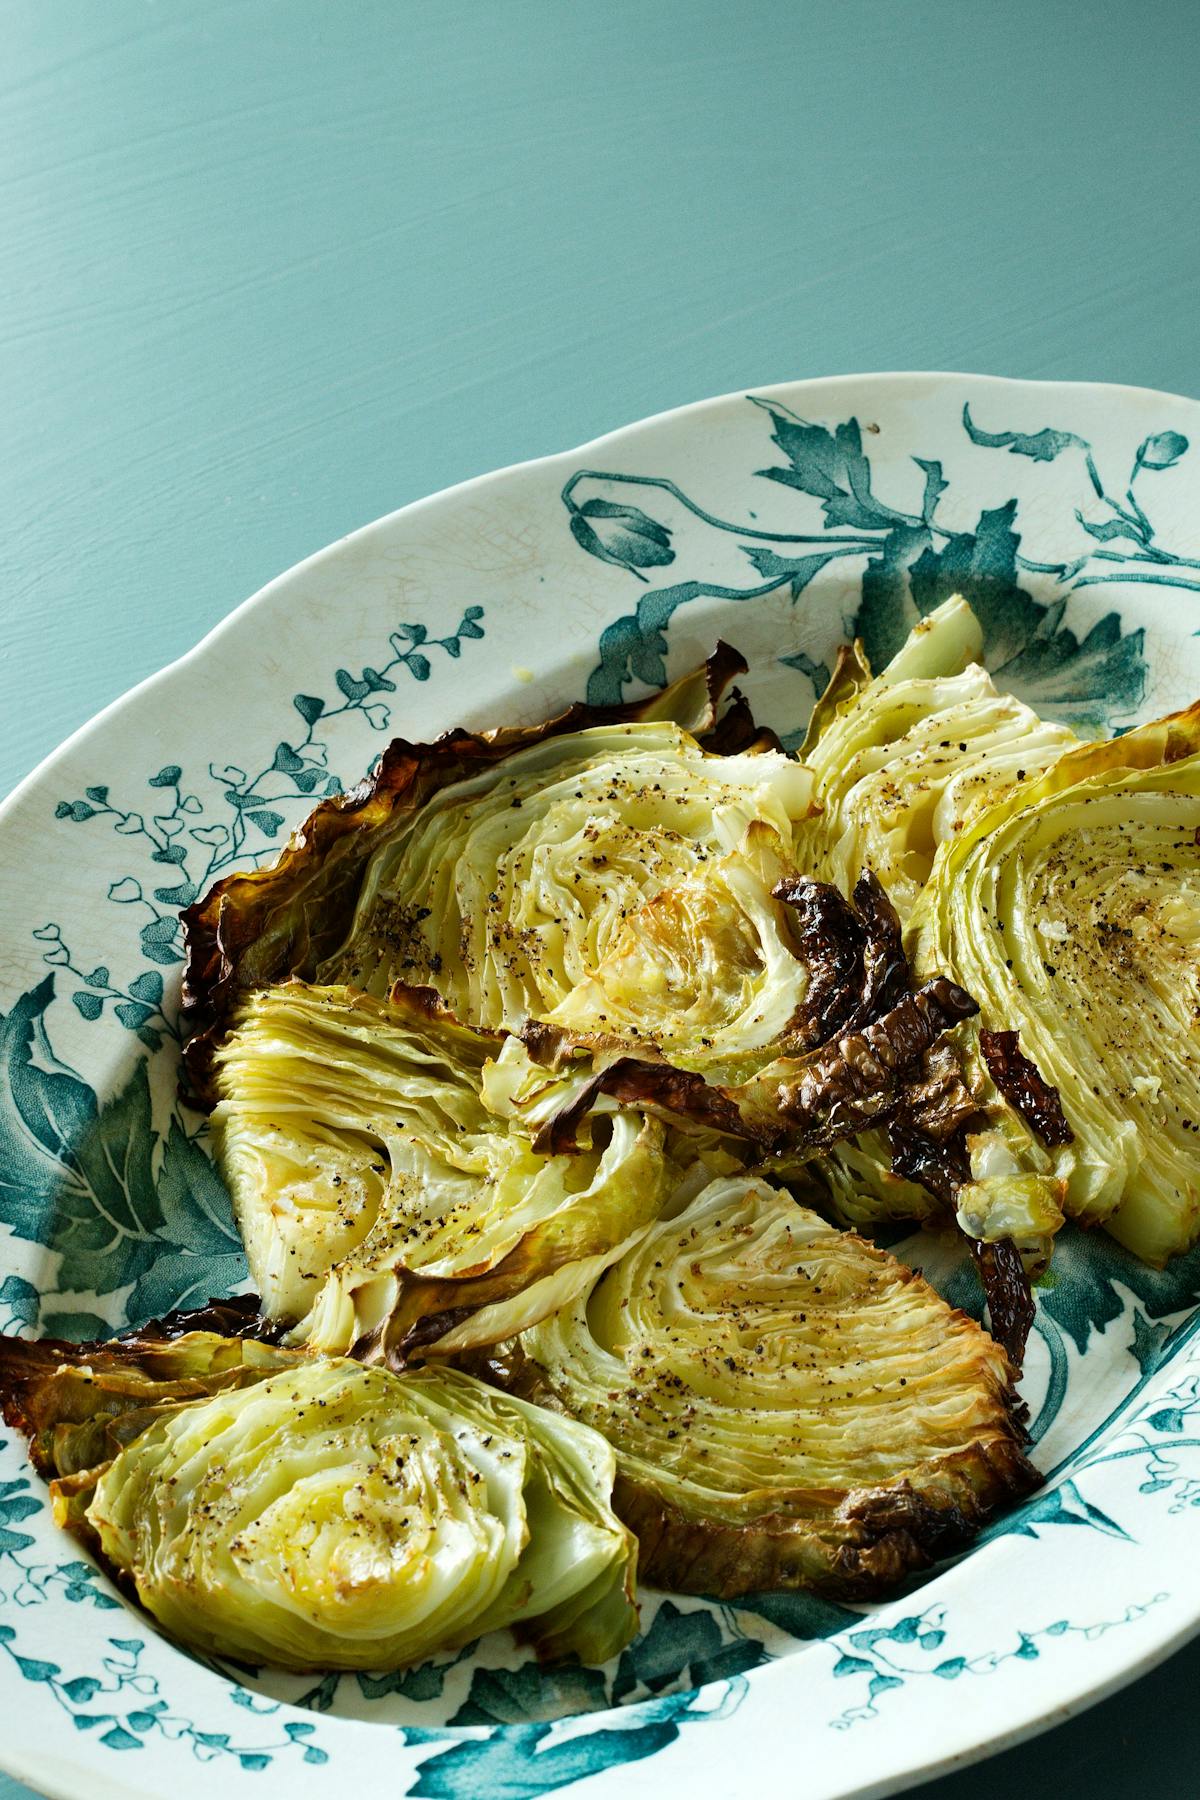 Roasted cabbage